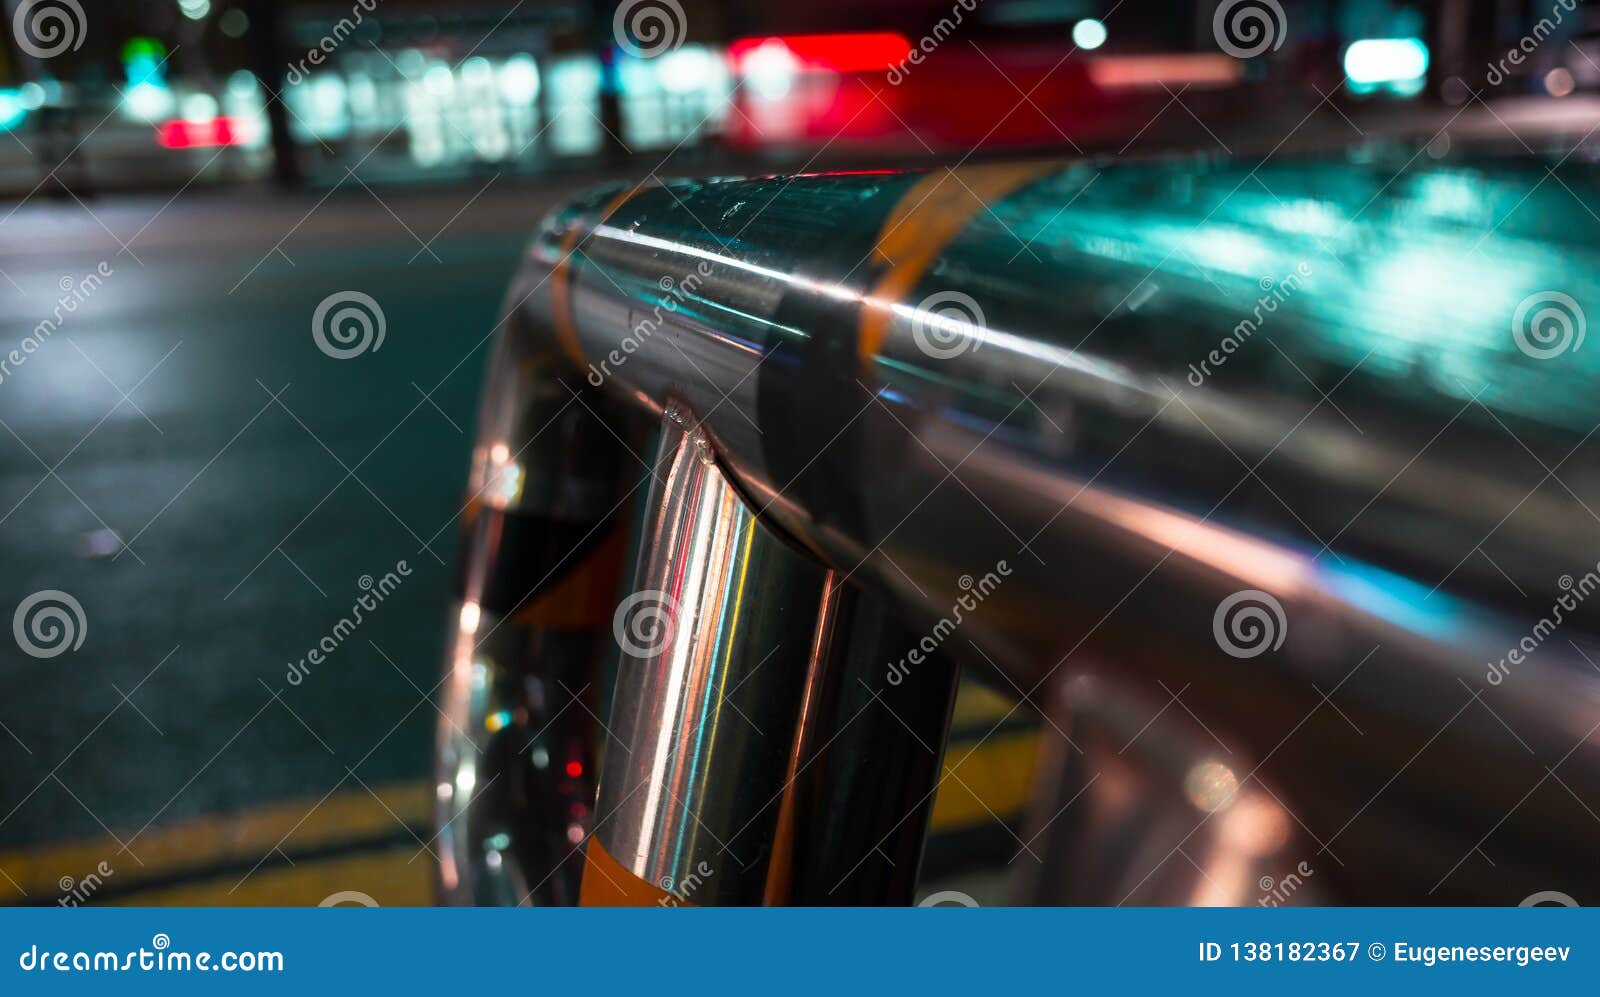 Abstract night city background with wet steel railing near urban road